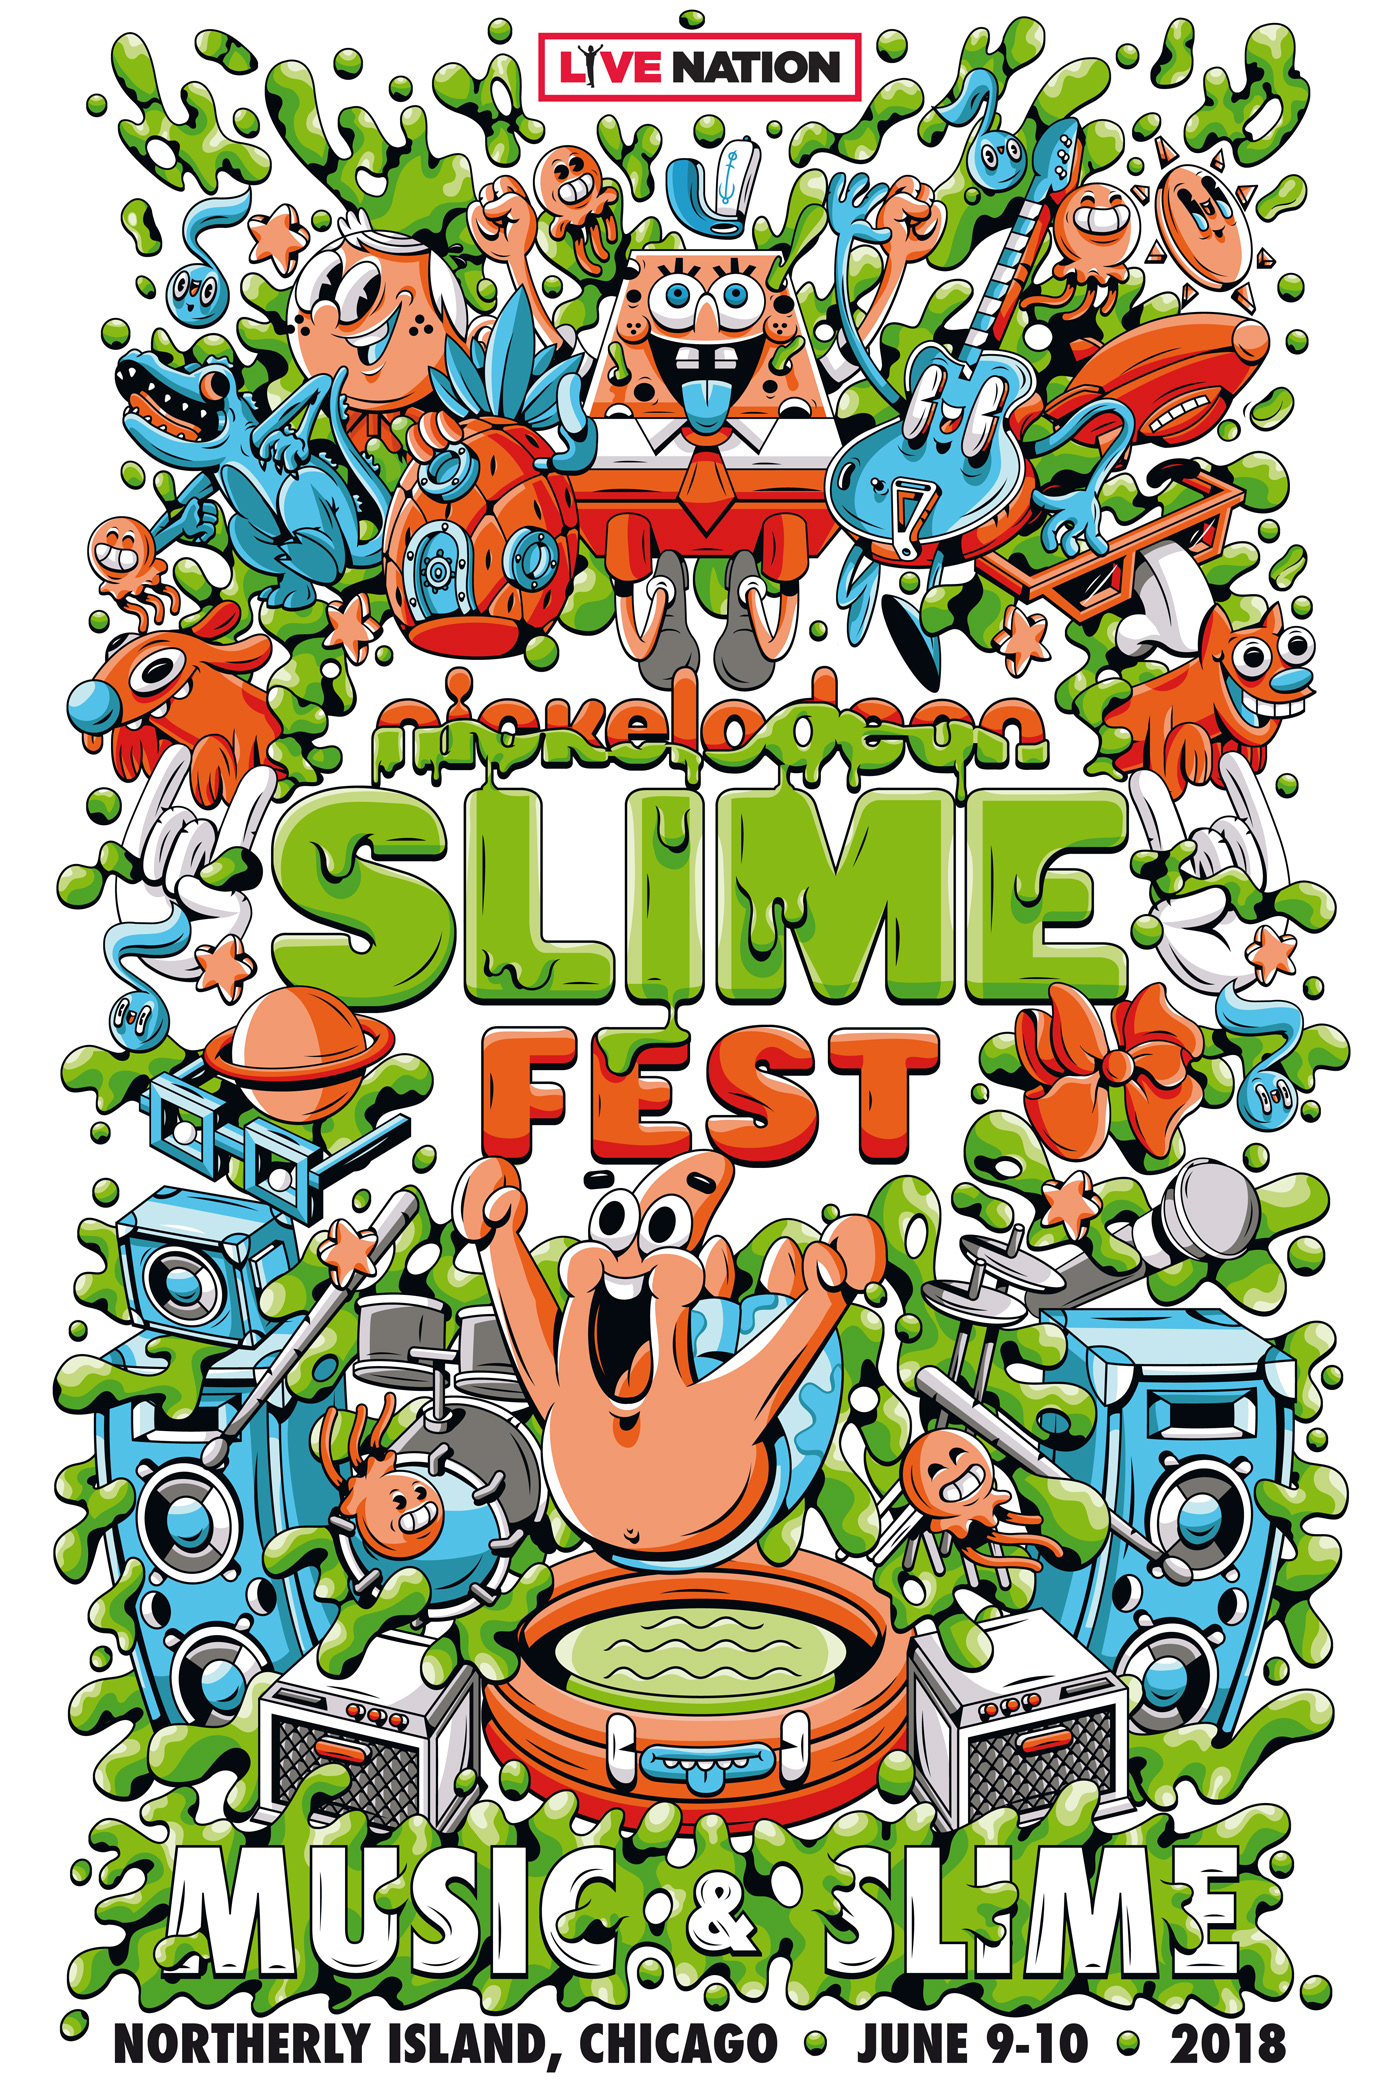 Illustrations, Logos and Icons for Nickelodeon's Slime Fest